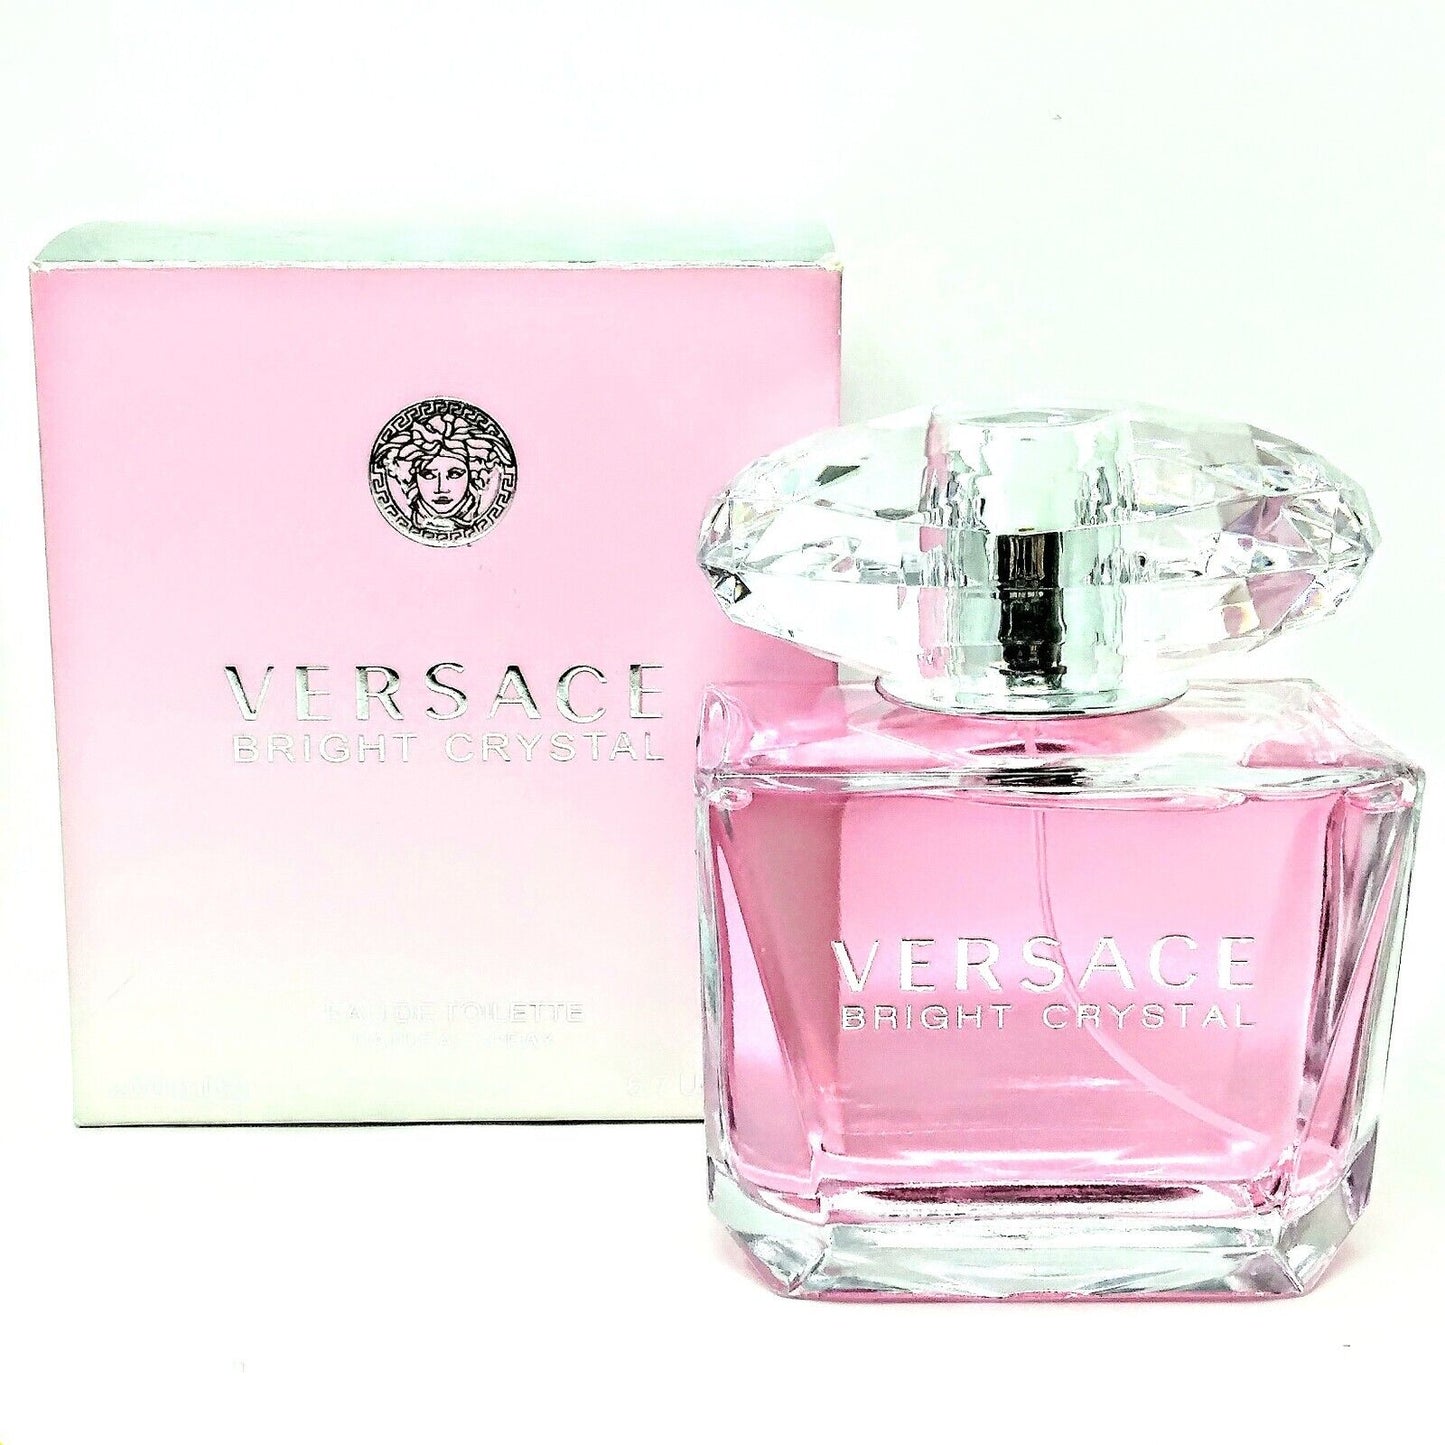 Versace Bright Crystal Women's EDT Fragrance 6.7 oz 200 ml New Sealed